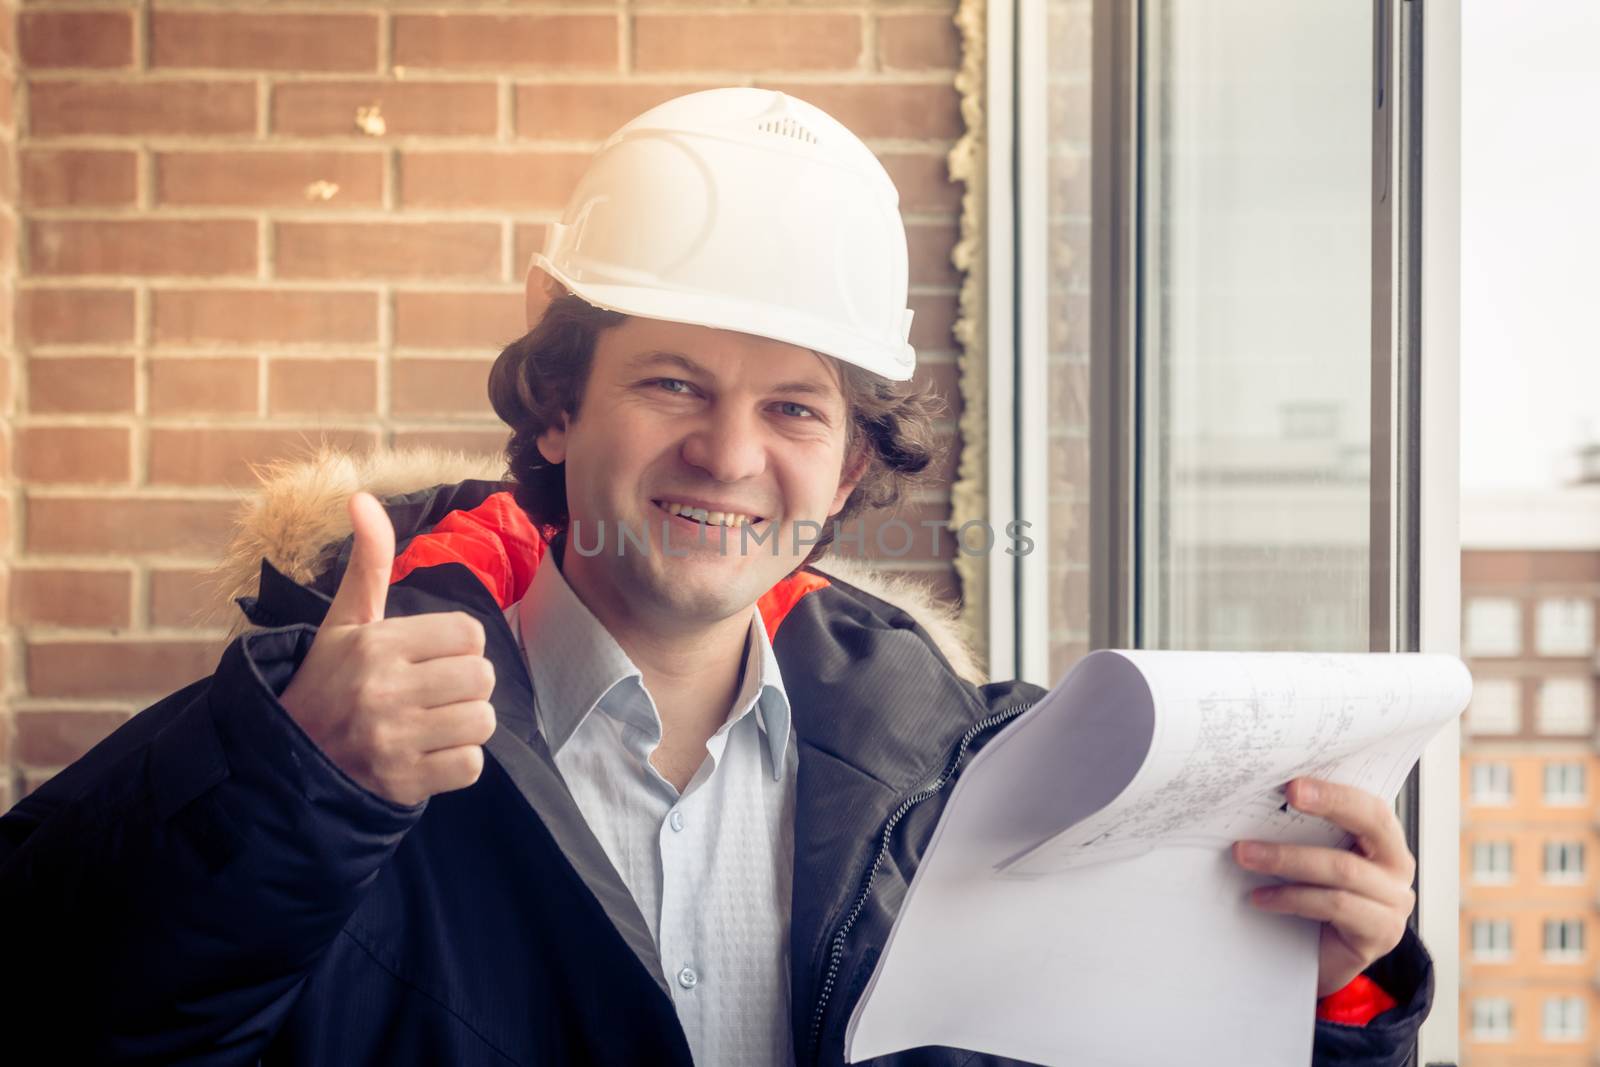 Handyman giving thumbs-up. Engineer with blueprint on brick background. Happy builder with pleased smile. Soft focus, toned